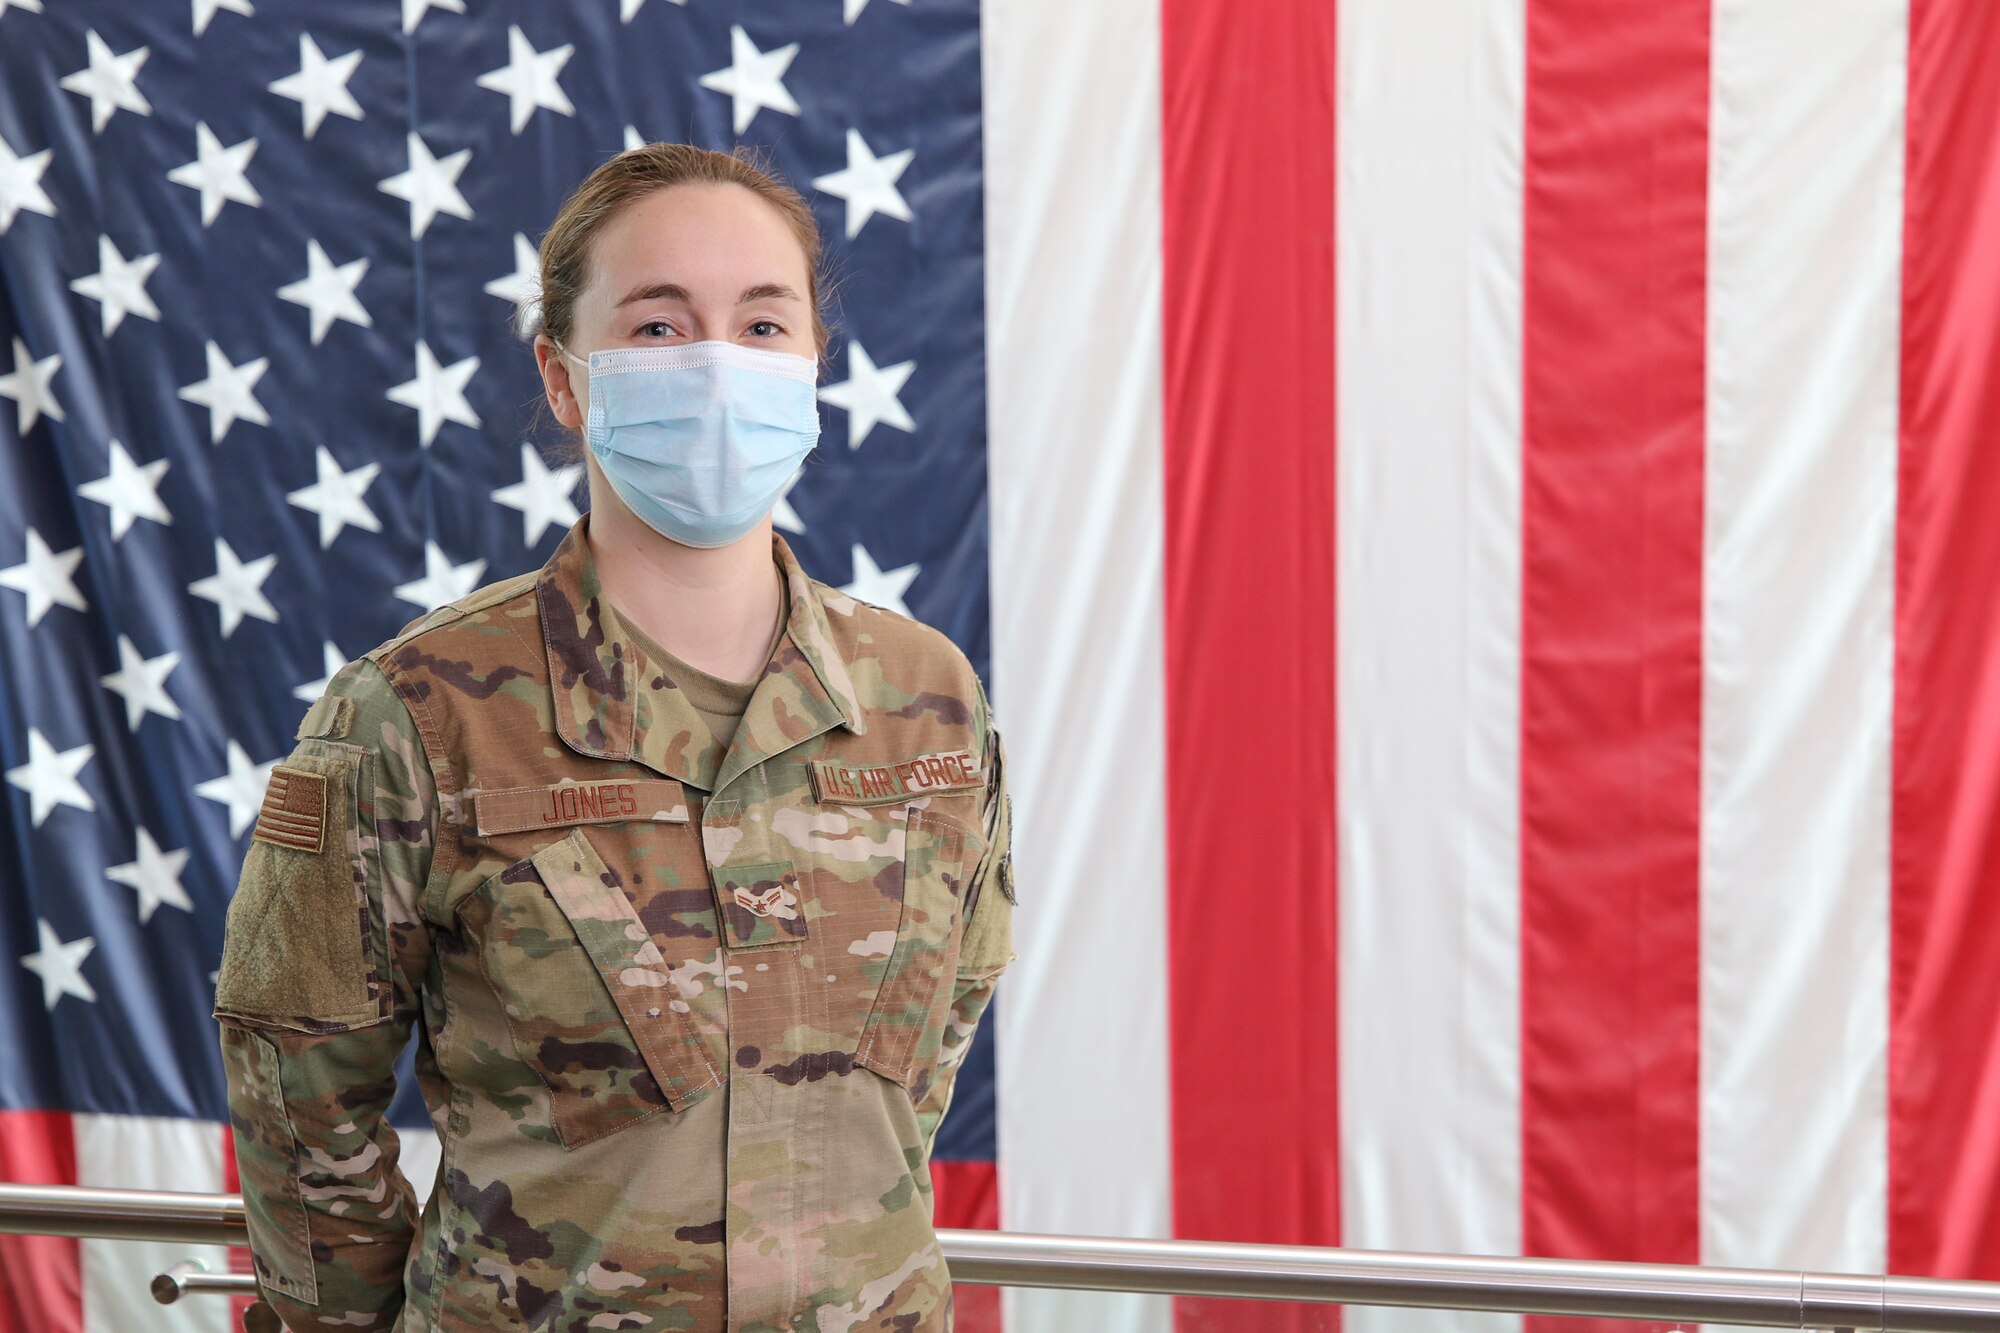 Airman 1st Class Hannah Jones-Trudeau poses for a photo Feb. 23, 2021, while working for Massachusetts National Guard's Joint Force Headquarters, at Hanscom Air Force Base, Massachusetts, and has been tasked with getting the COVID-19 vaccine to base. The COVID-19 vaccine is currently available to select Soldiers and Airmen based on risk and mission requirements but will be available widely as supplies increase. (U.S. Air National Guard photo by Capt. Aaron Smith)